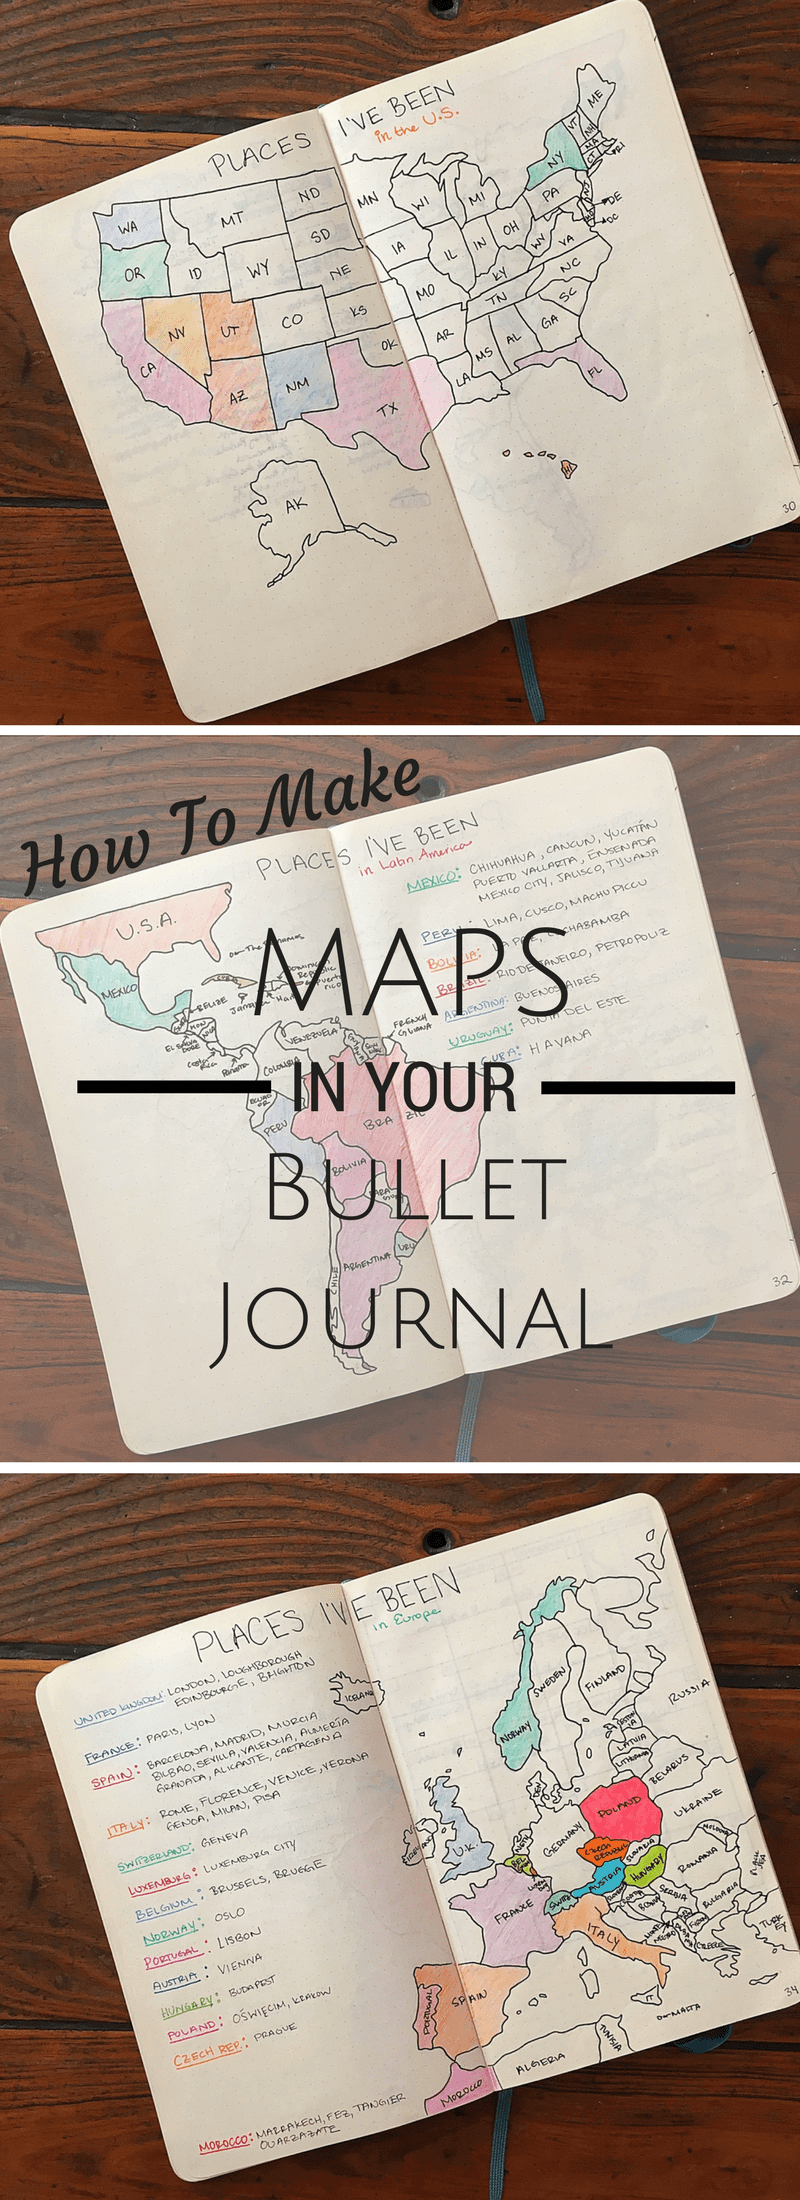 How to Make Maps in your Bullet Journal - Bad with Directions: Learn how to make cute country/world maps in your bullet journal! They are pretty, artsy, and a nice reminder (and inspiration) to travel around the world. 